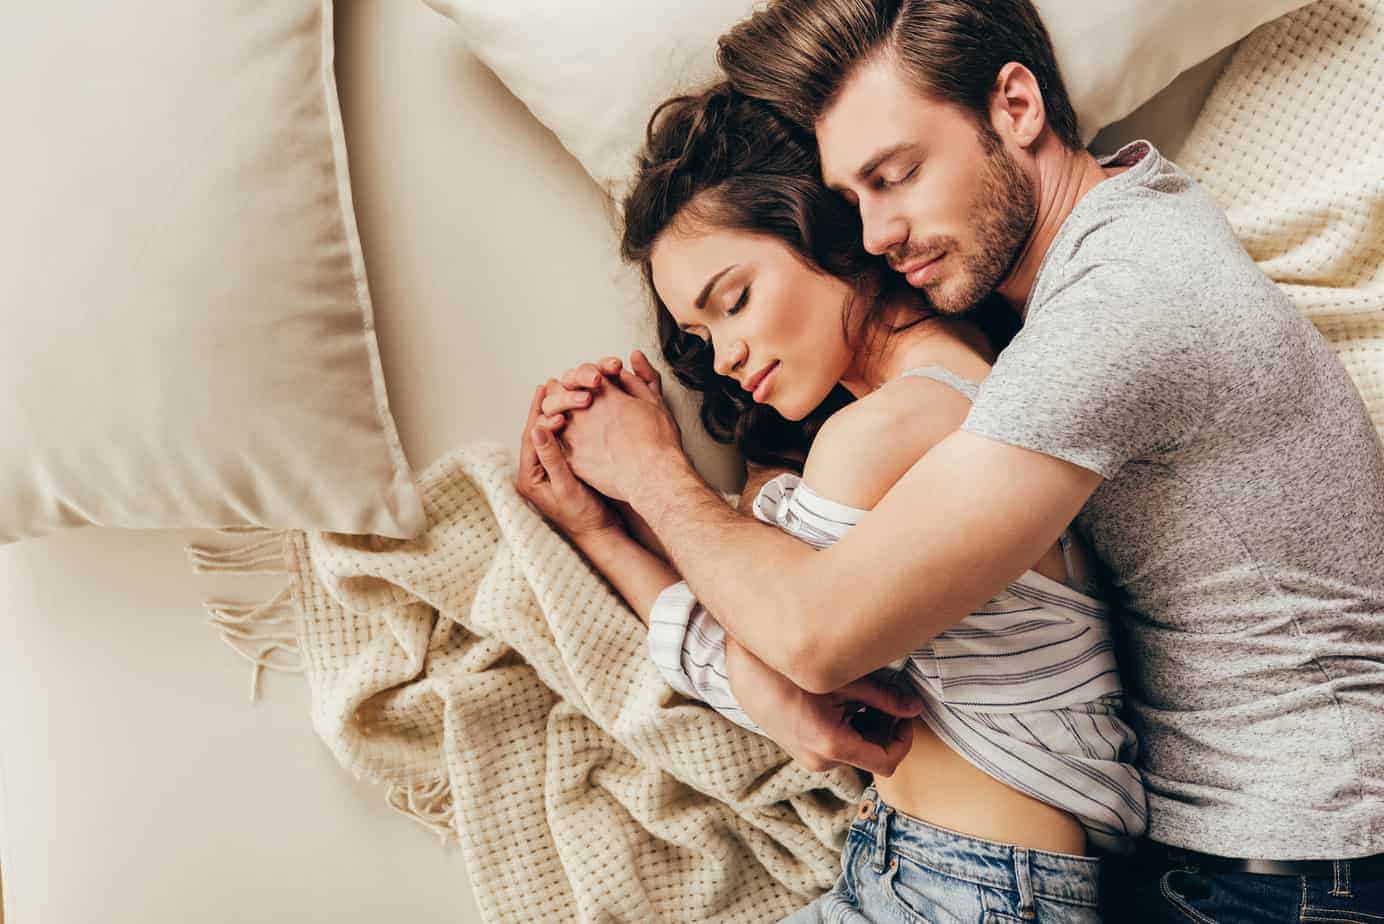 Emma Sleep UK - Spooning is a sleeping position for couples in which the  person in the back embraces the partner in the front close to the body.  This position increases the